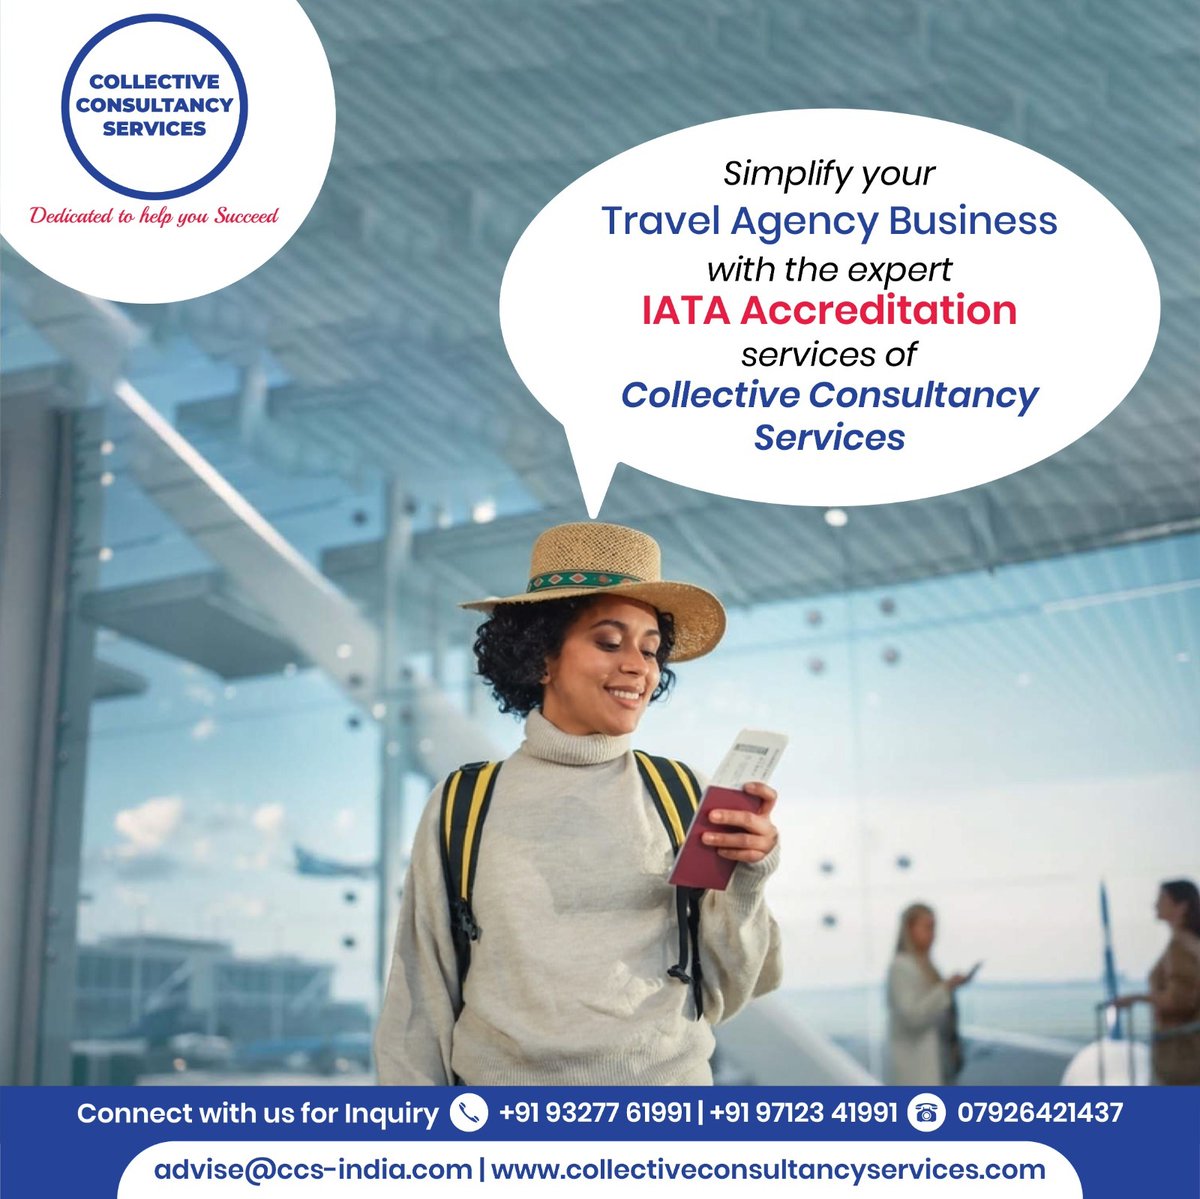 Streamline your travel agency with the professional IATA accreditation services of CCS and simplify the path to success.
Contact - @bajaj.ankitkumar - 9327761991
Fill in this link - bit.ly/3QGkdcy for more details
#SimplifyBusiness #TravelAgency #IATAaccreditation